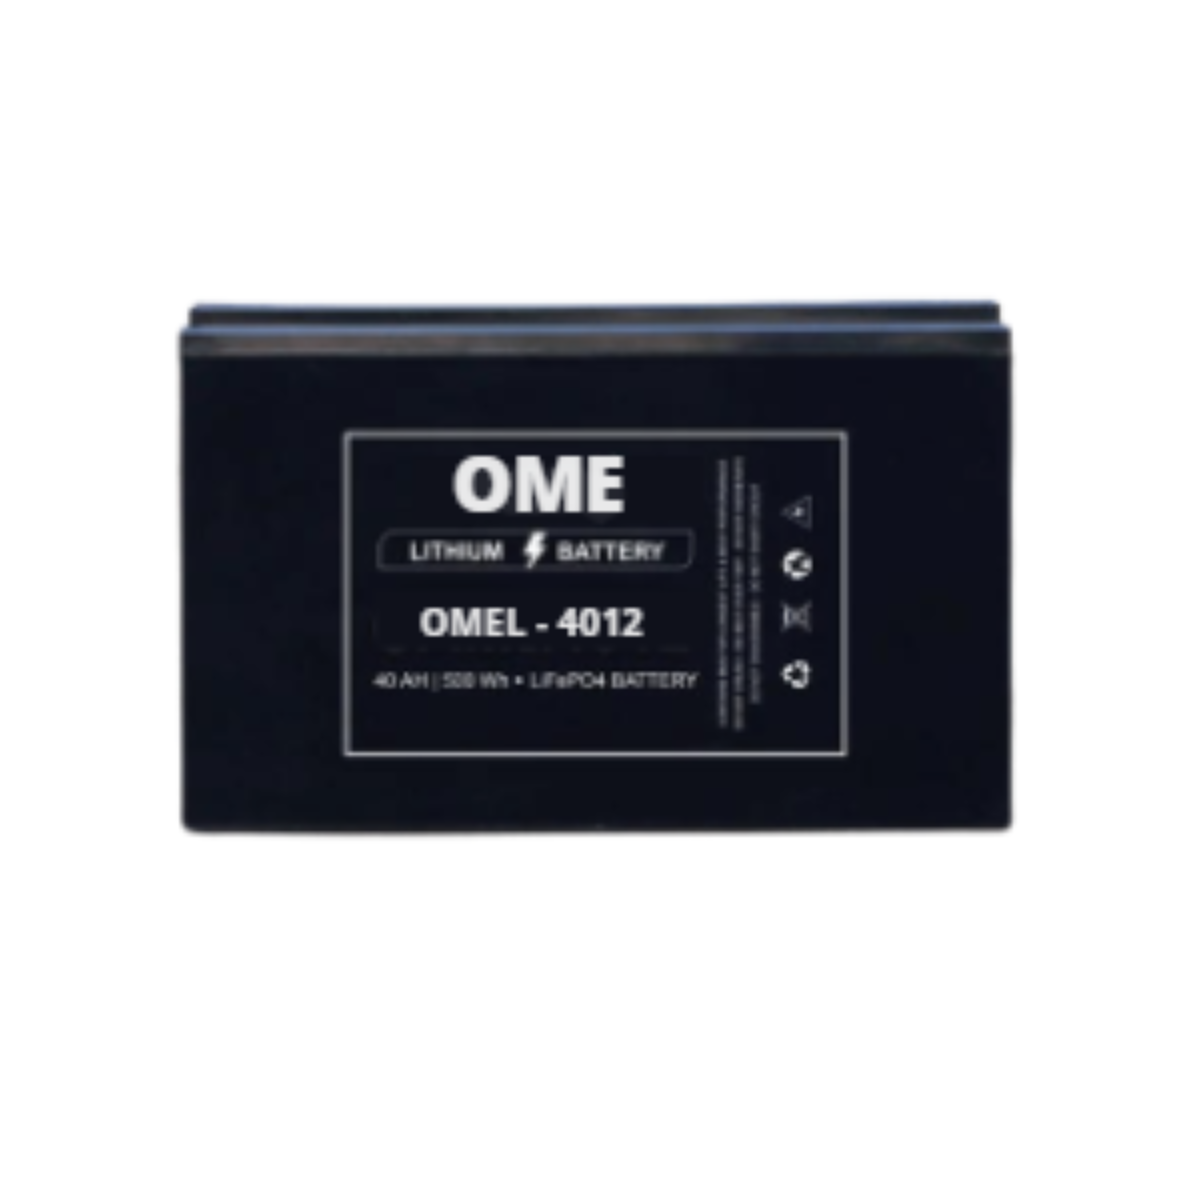 OMEL 40Ah / 500 Watt Lithium Battery for Home and Shops - Om Electronics  and Batteries Chennai